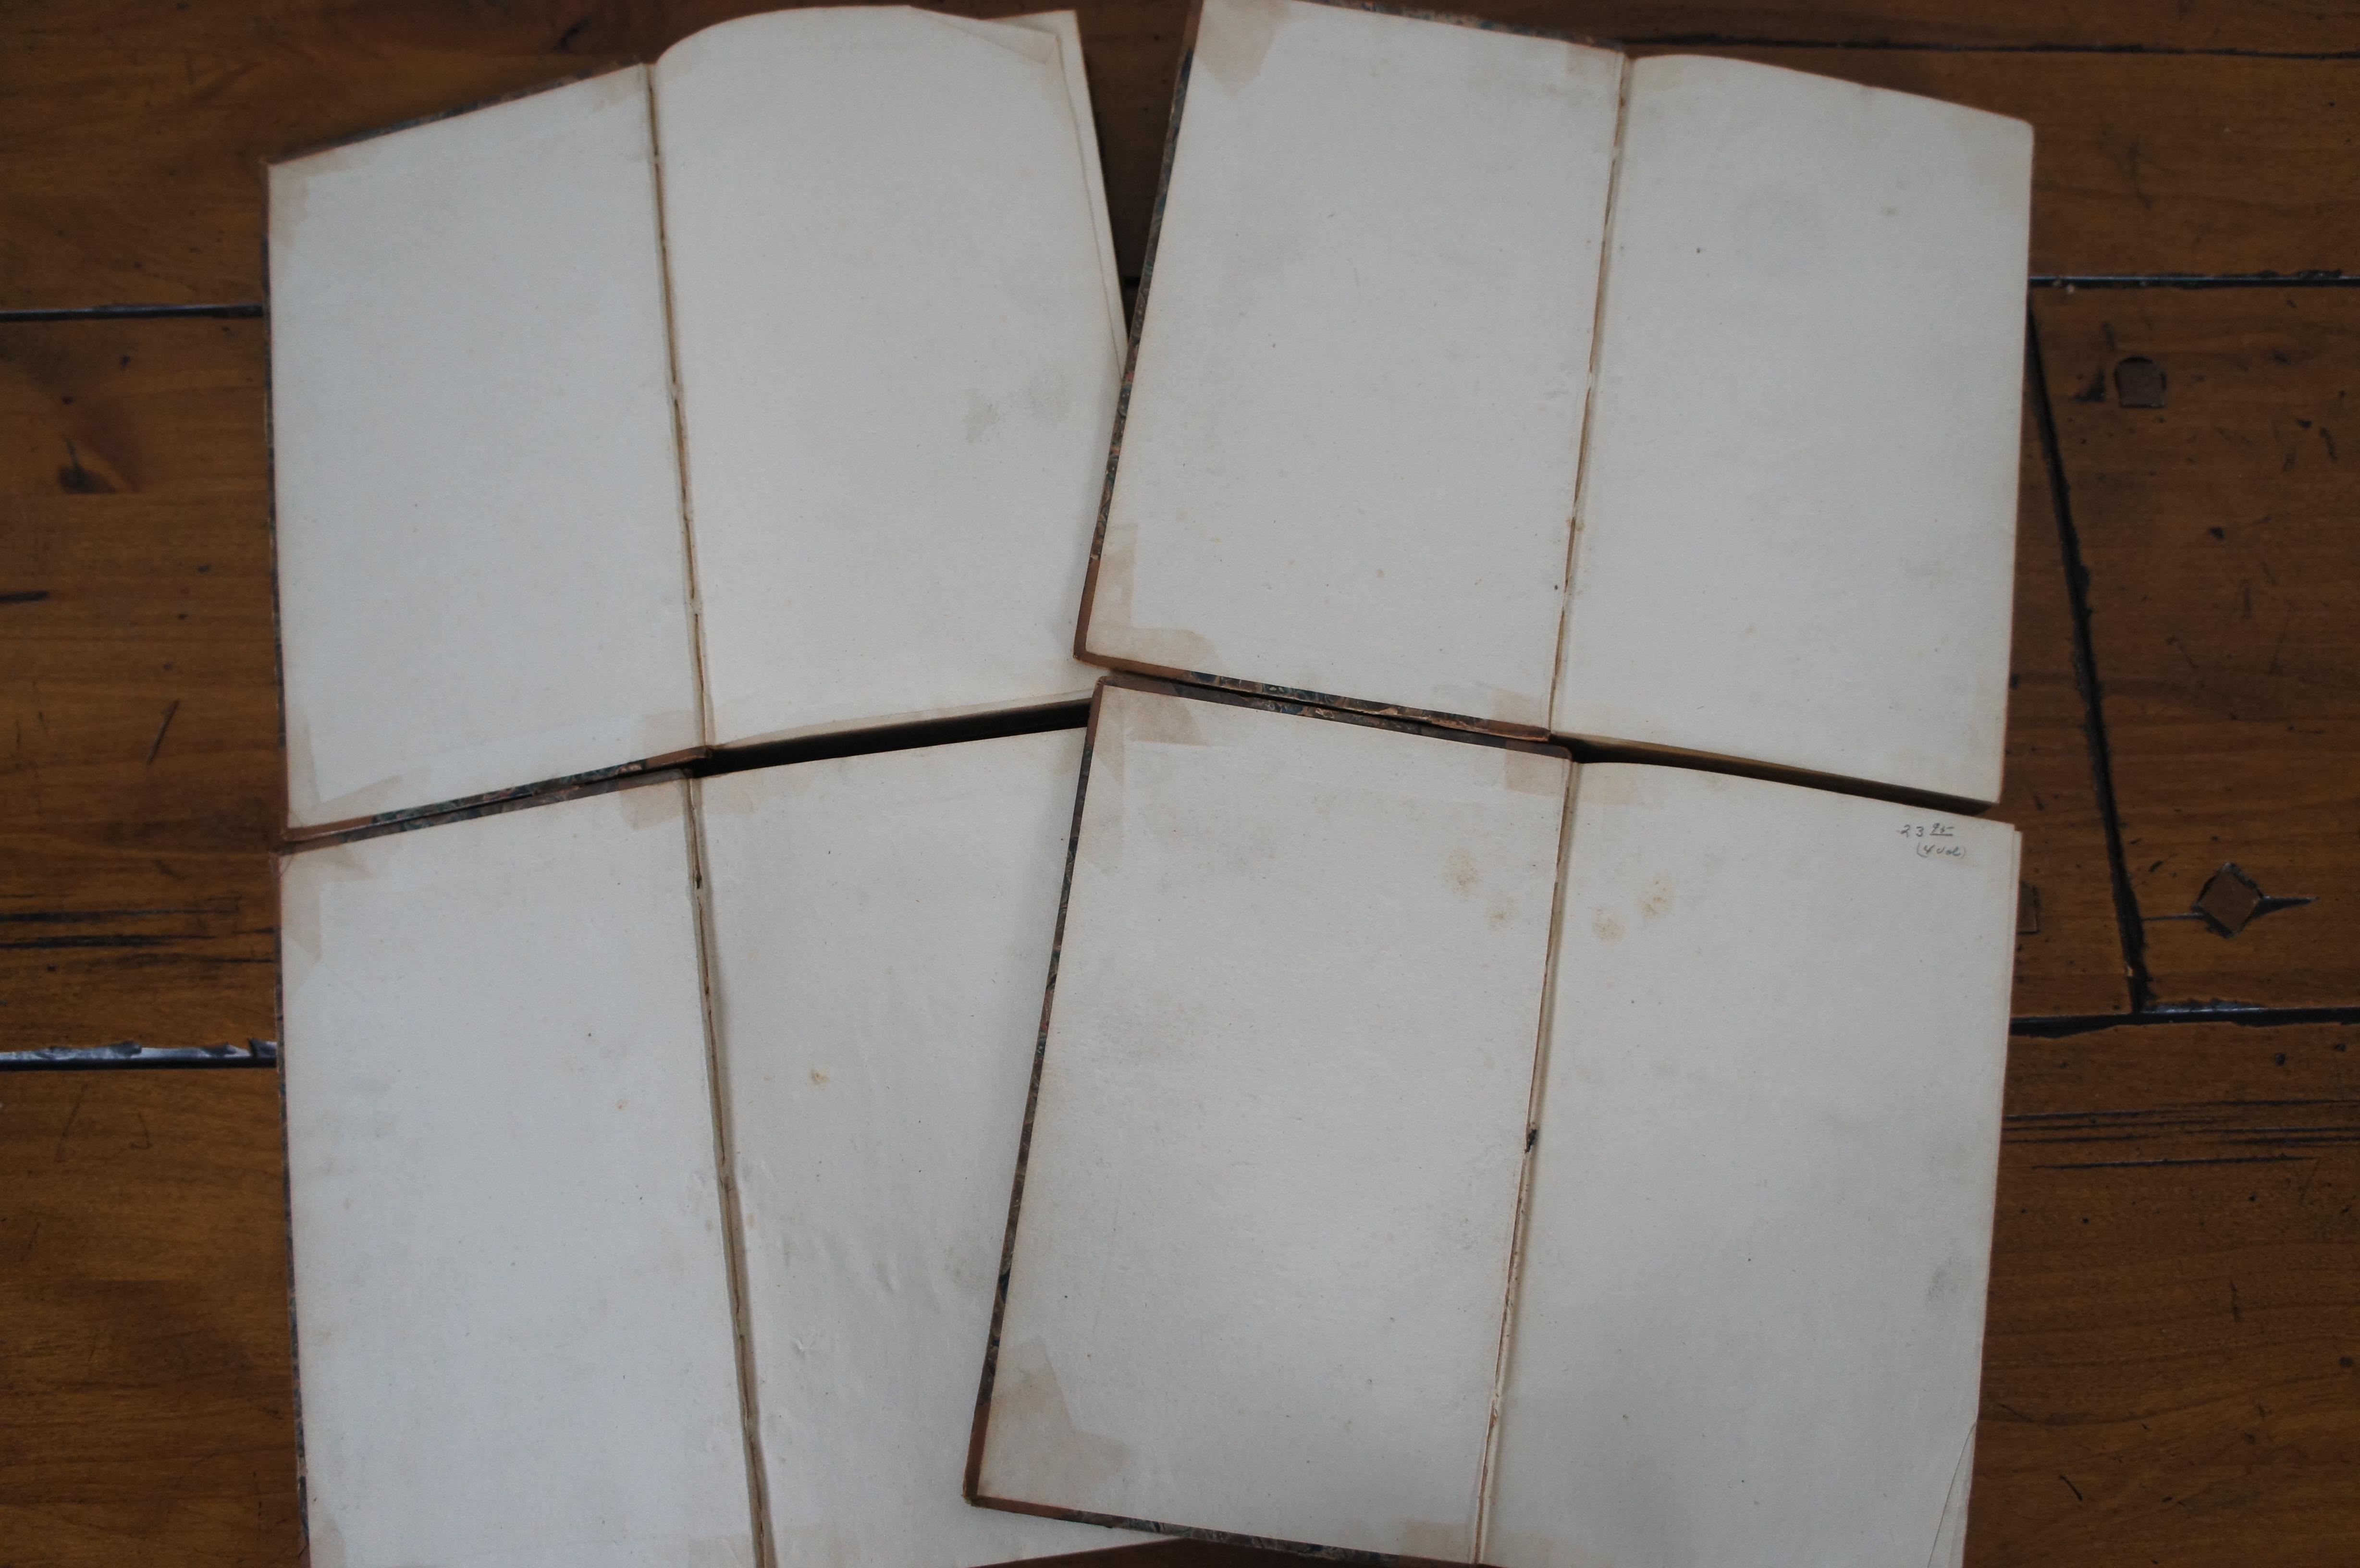 4 Livres anciens Goldsmiths History of Earth Animated Nature Leather Vol I-IV, 1808 en vente 1